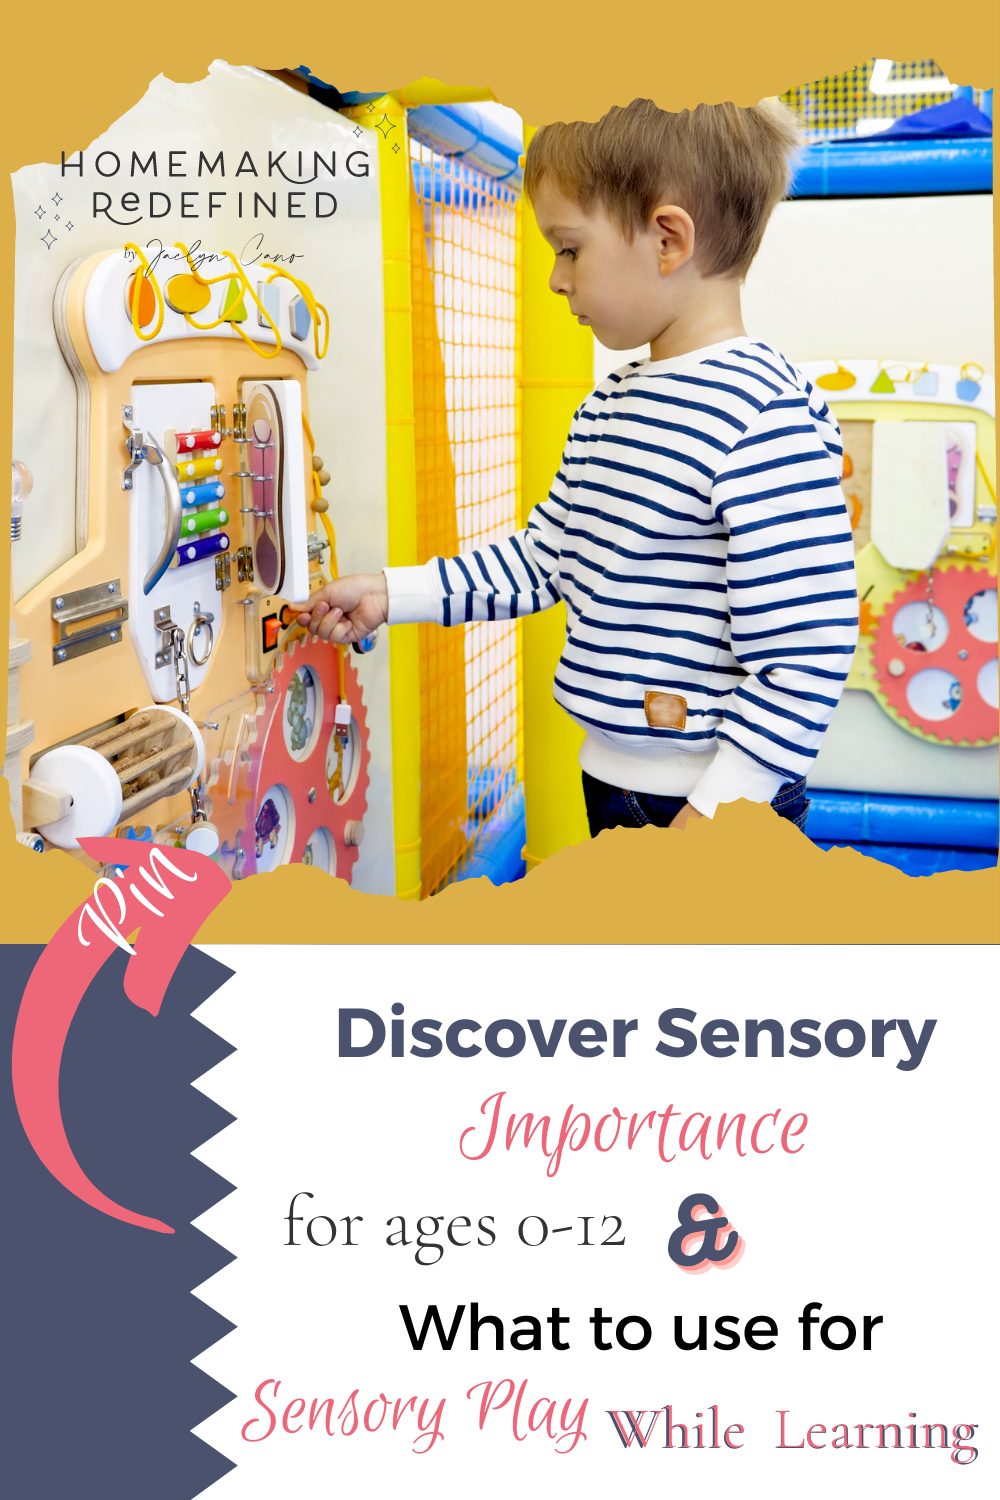 discover-sensory-importance-for-ages-0-12-years-and-what-to-use-for-sensory-play-while-learning a child at a museum playing with sensory toys age 8